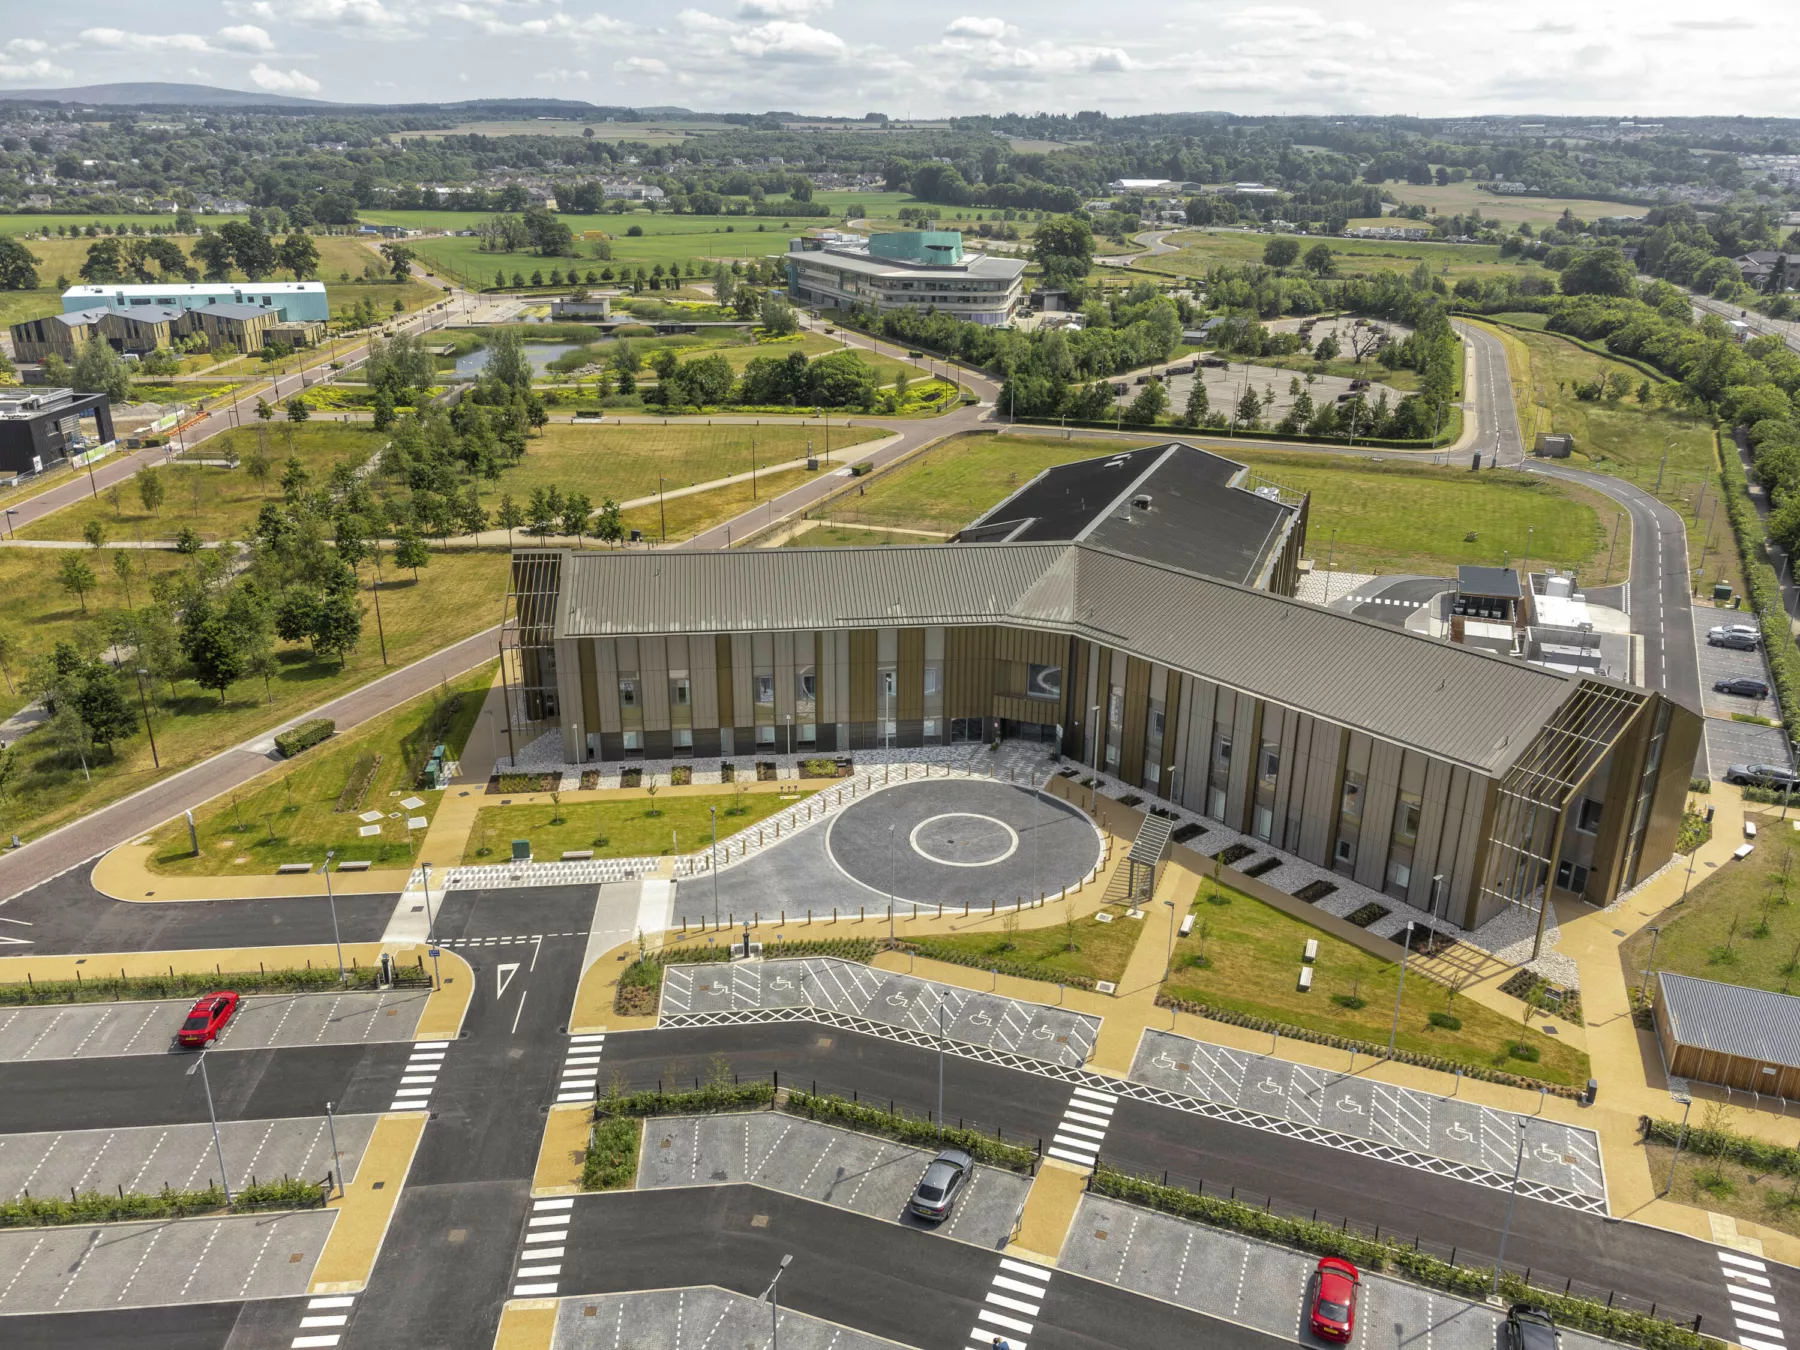 Aerial view of the National Treatment Centre - Highland, Inverness. The building's three wings form a triad in landscaped grounds. The building has a pitched roof and is clad in gold-bronze metal cladding. Car parks and surround lightly wooded areas are shown, with other buildings on the campus in the distance